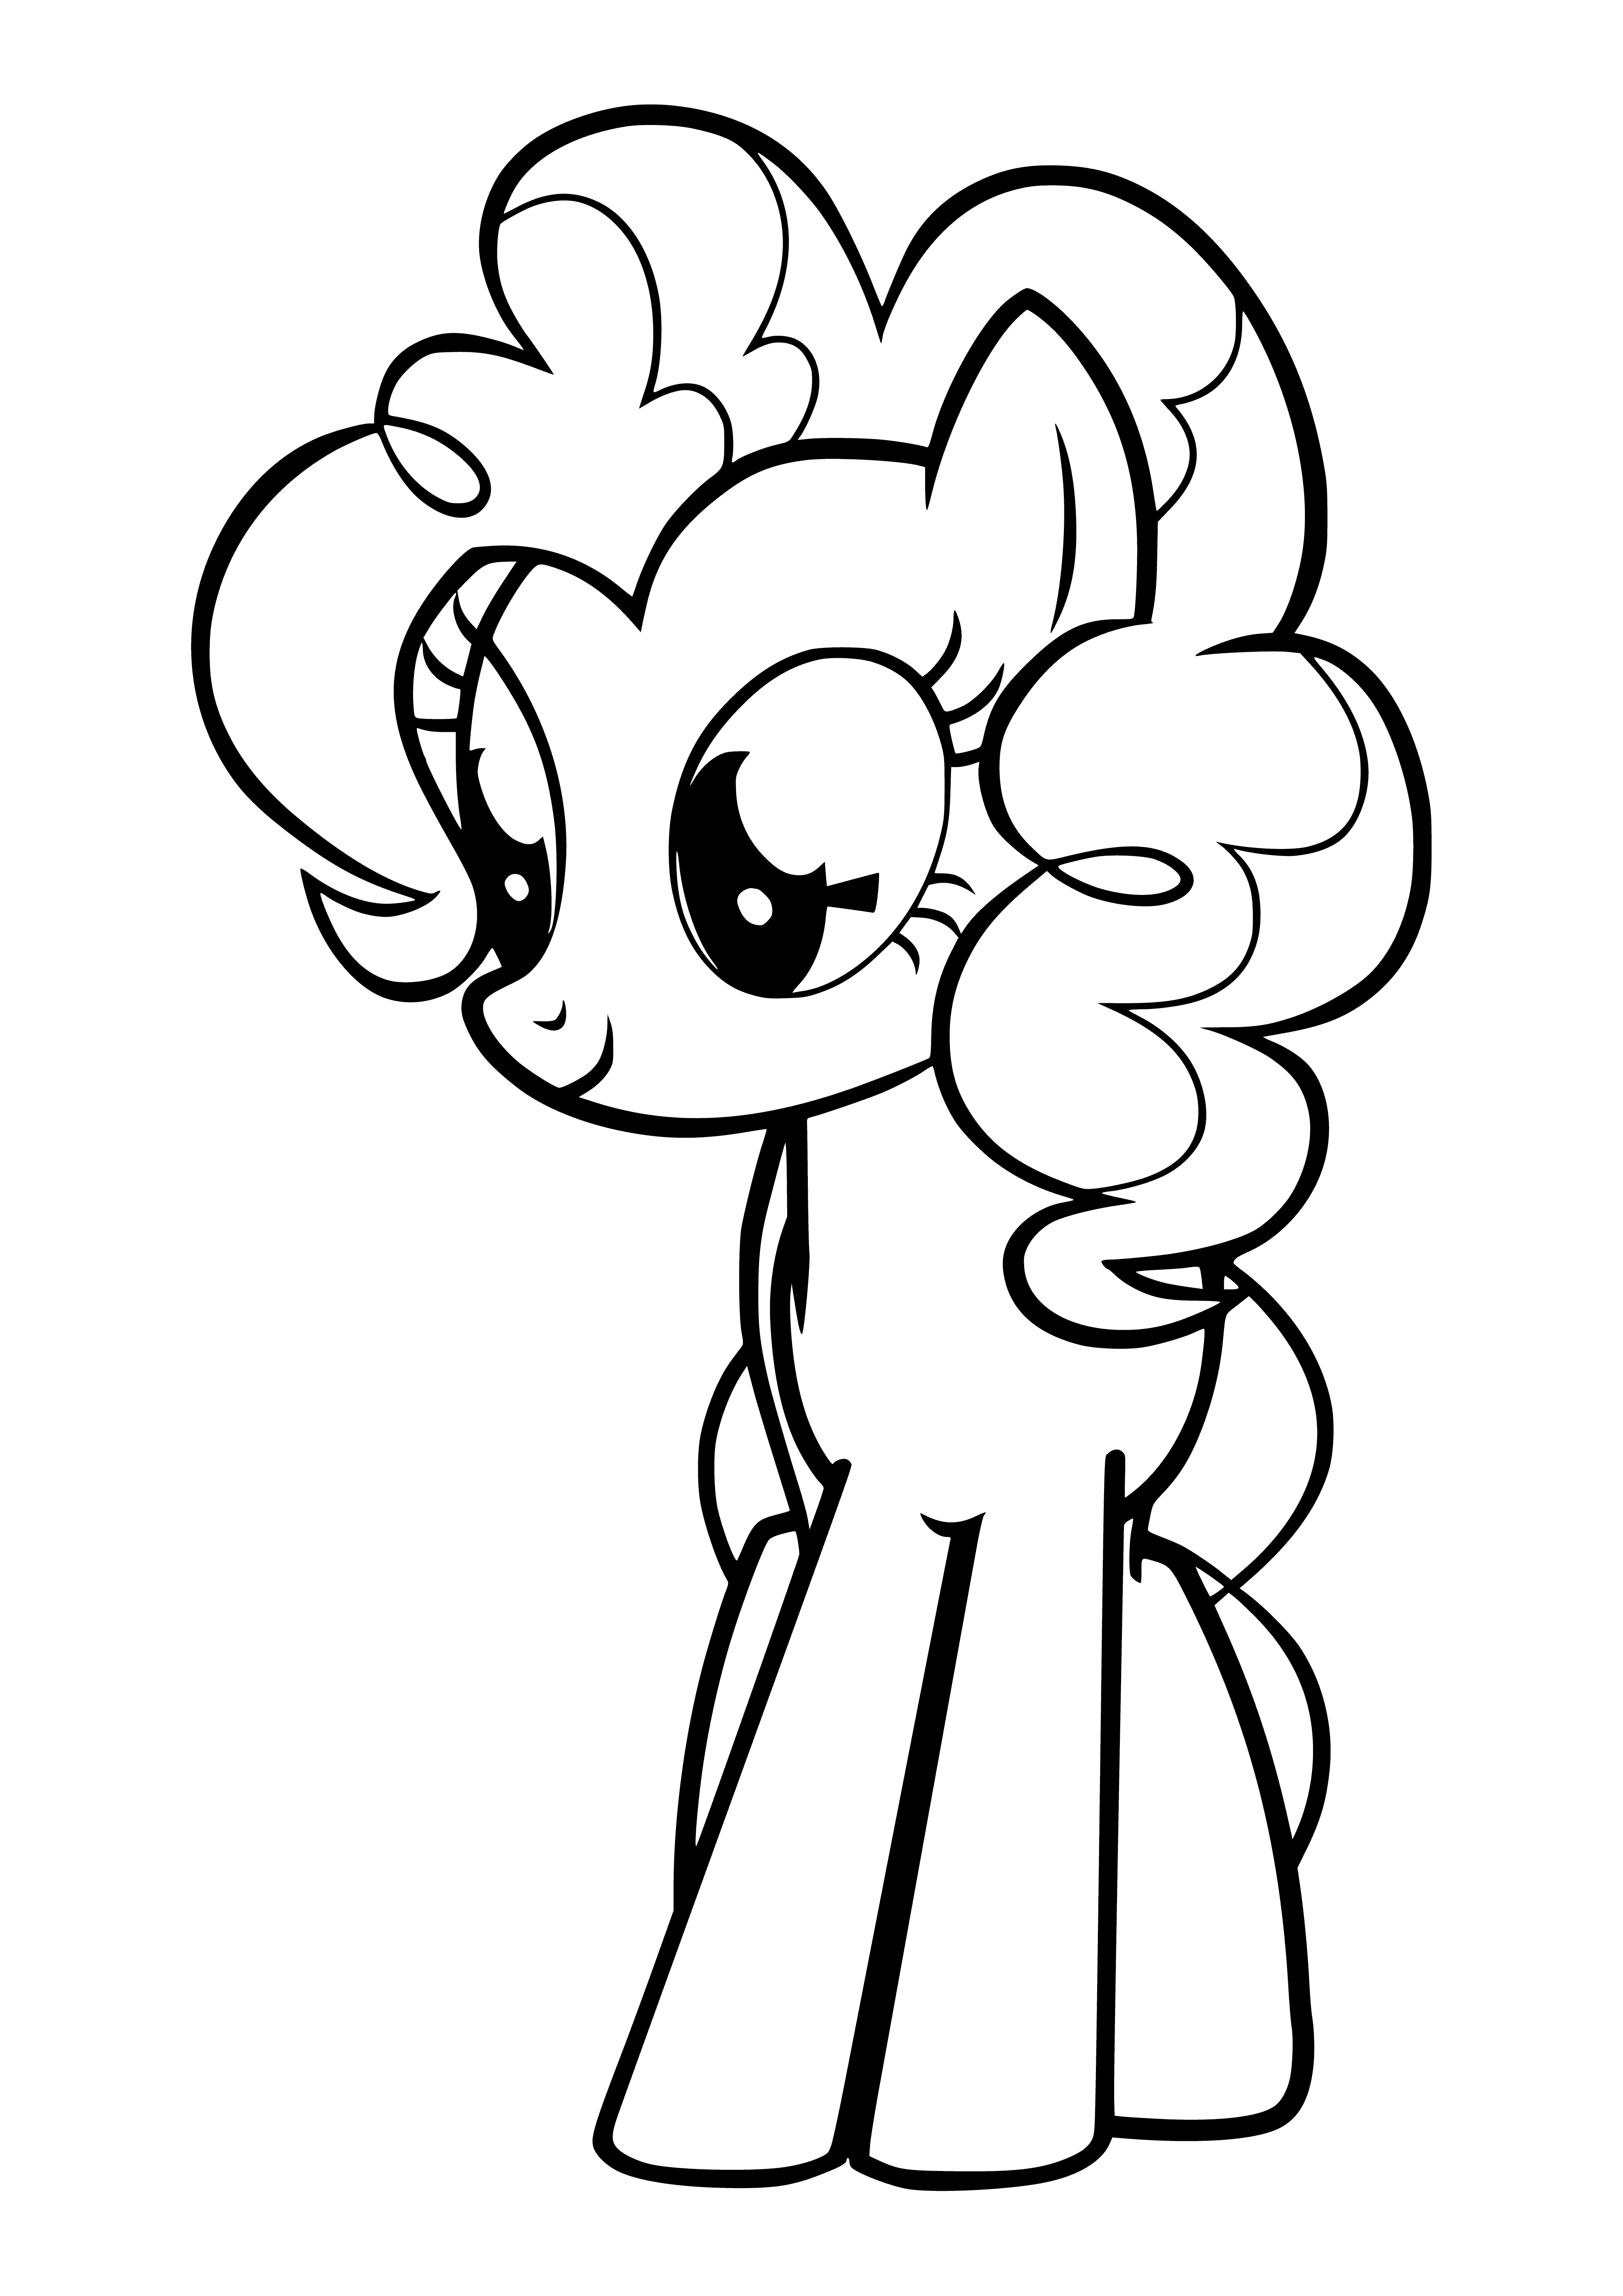 Pony Pinky Pie has light pink fur, a yellow mane/tail and 3 pink balloon cutie mark.